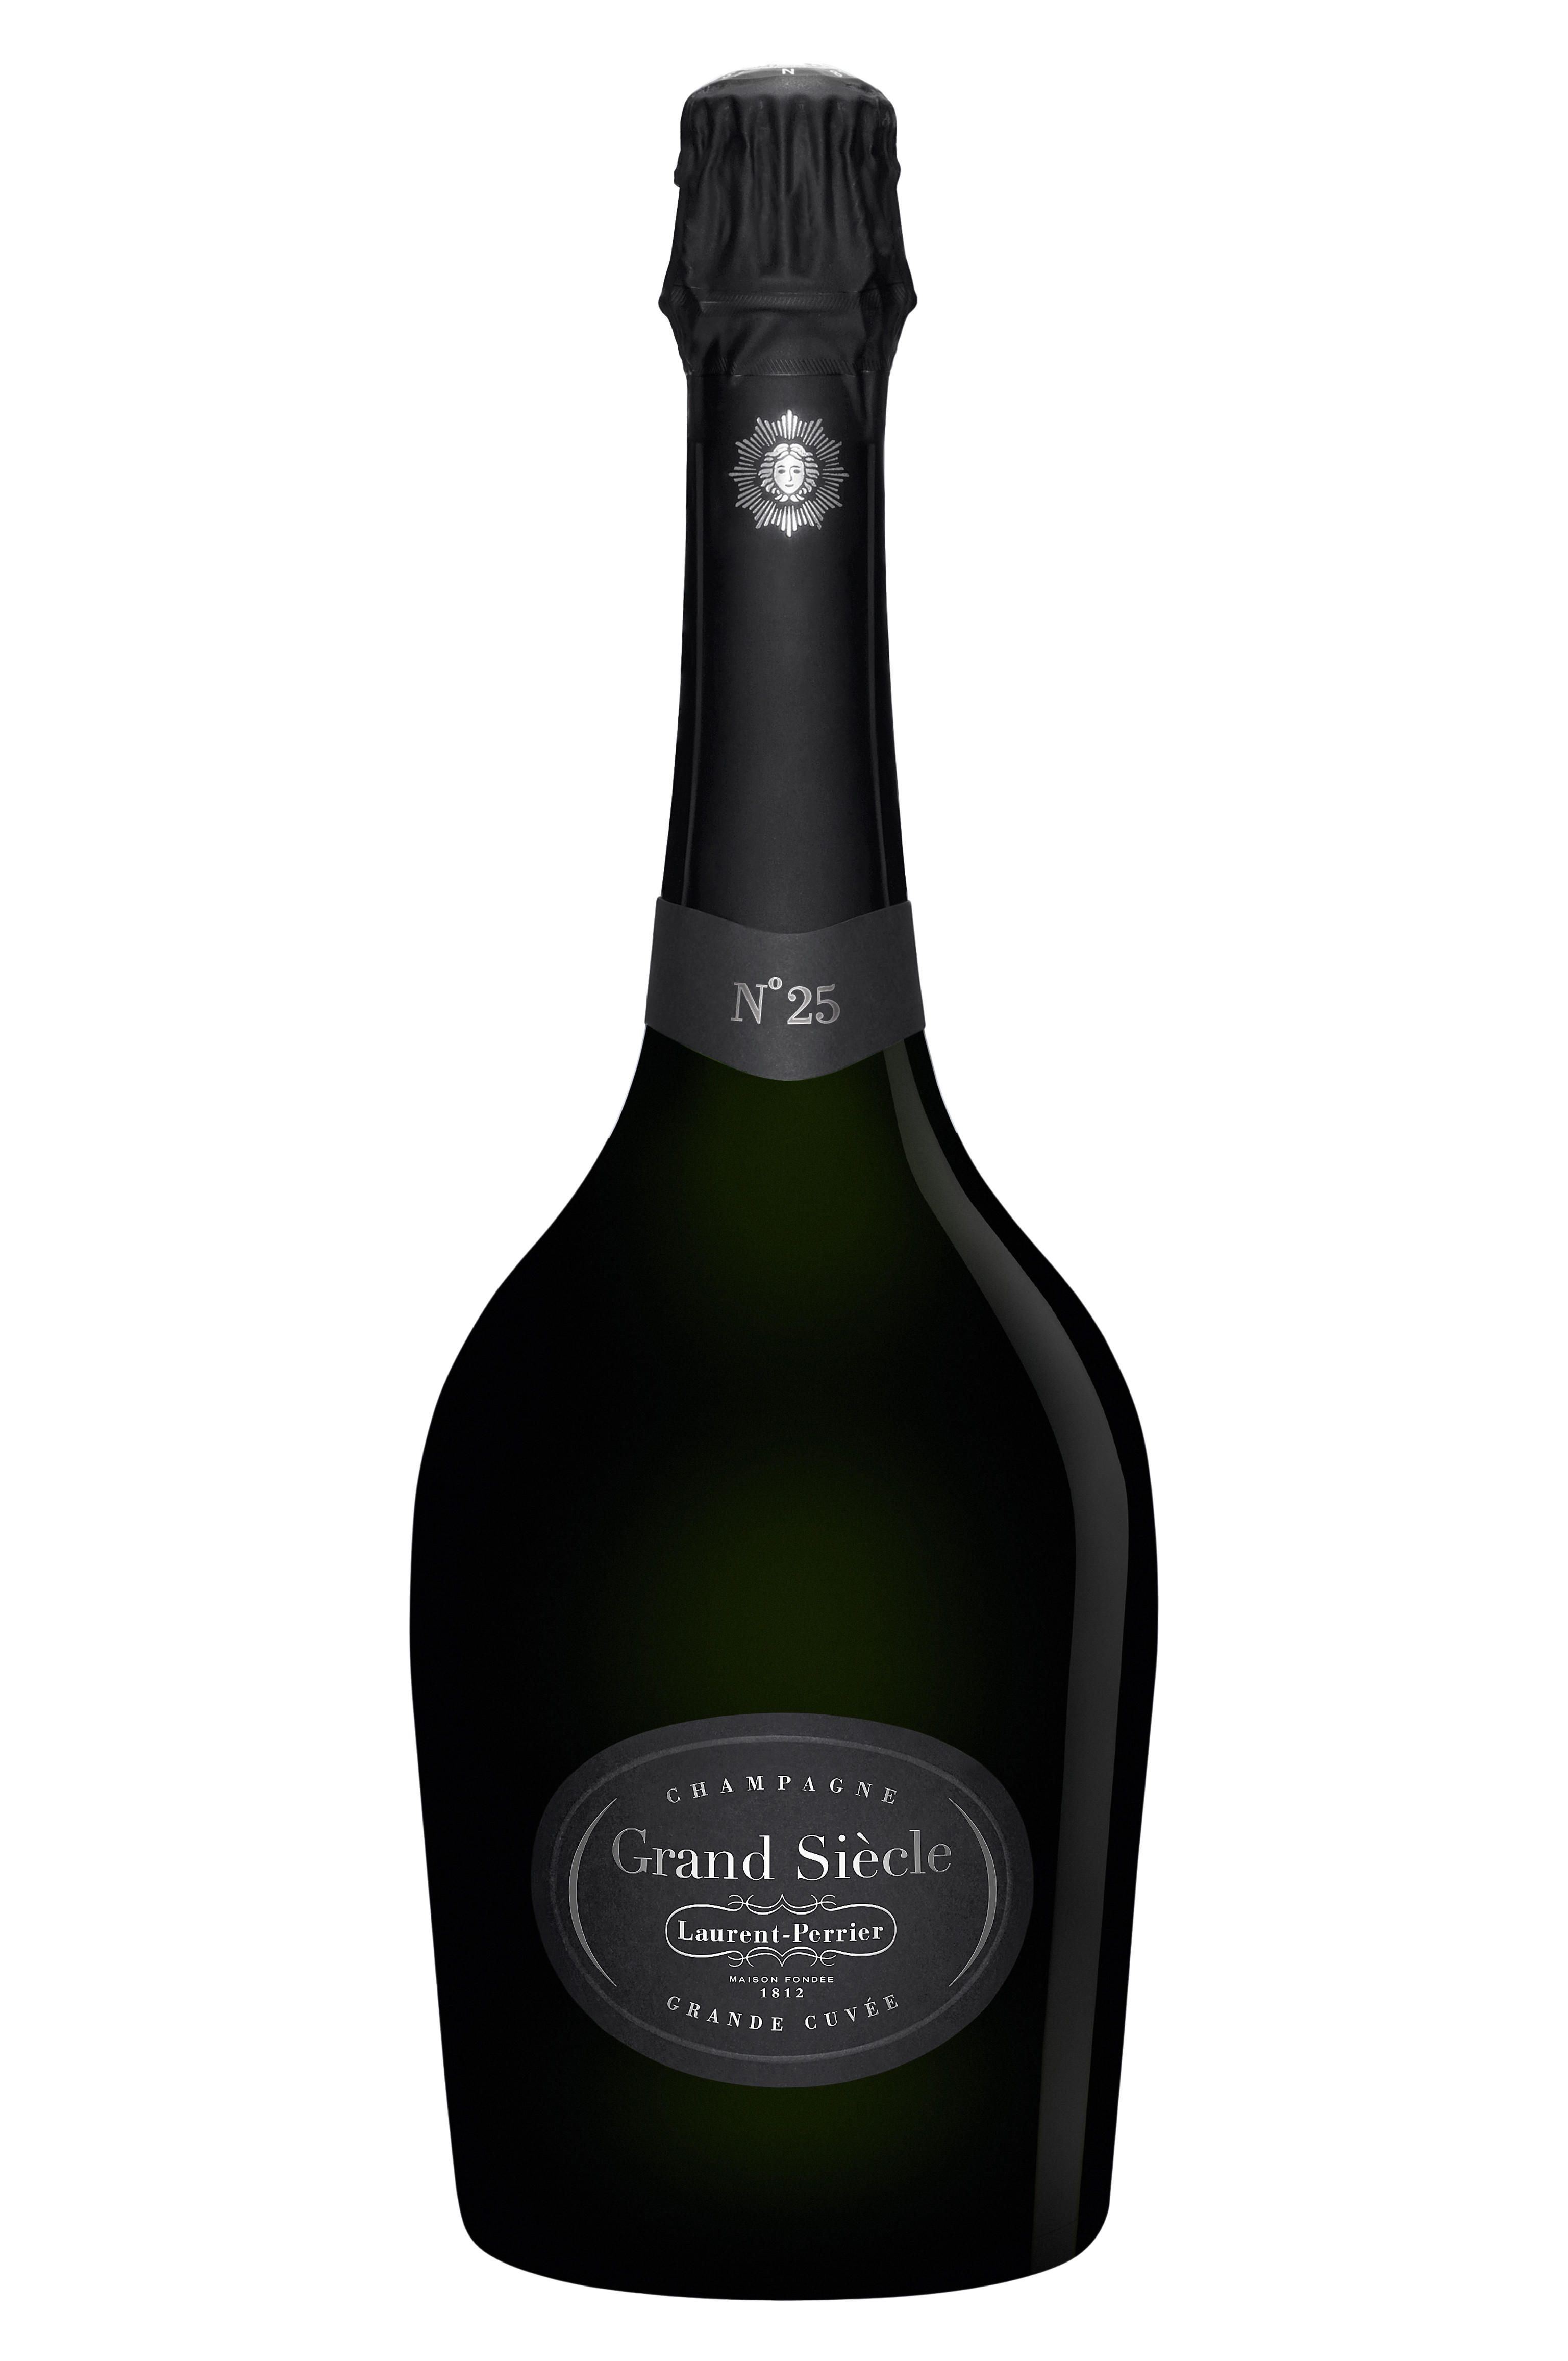 Buy Champagne Laurent-Perrier, Grand Siècle No. 25, Brut Wine - Berry Bros.  & Rudd